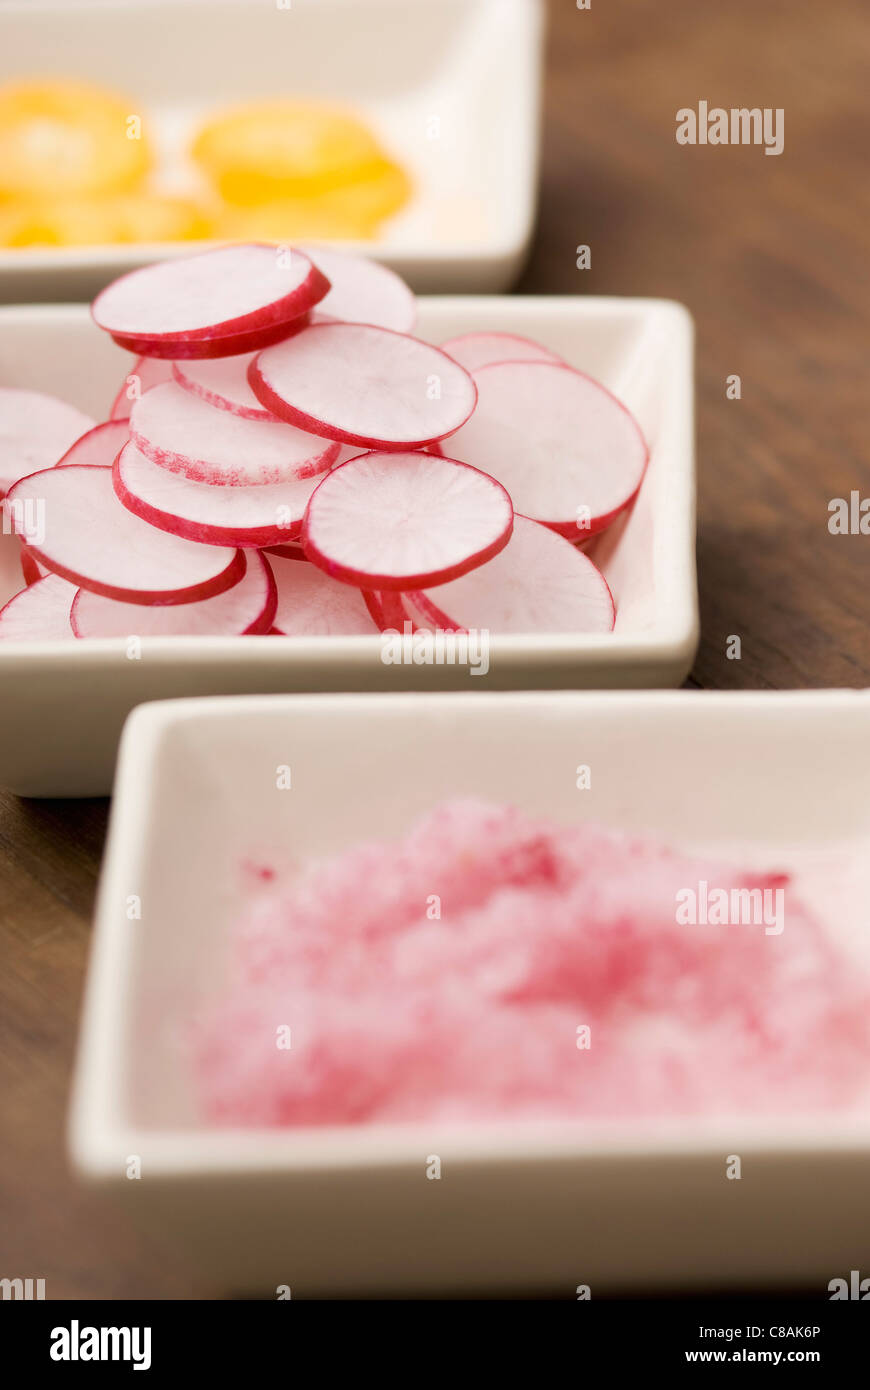 Dishes of sliced pink radishes Stock Photo